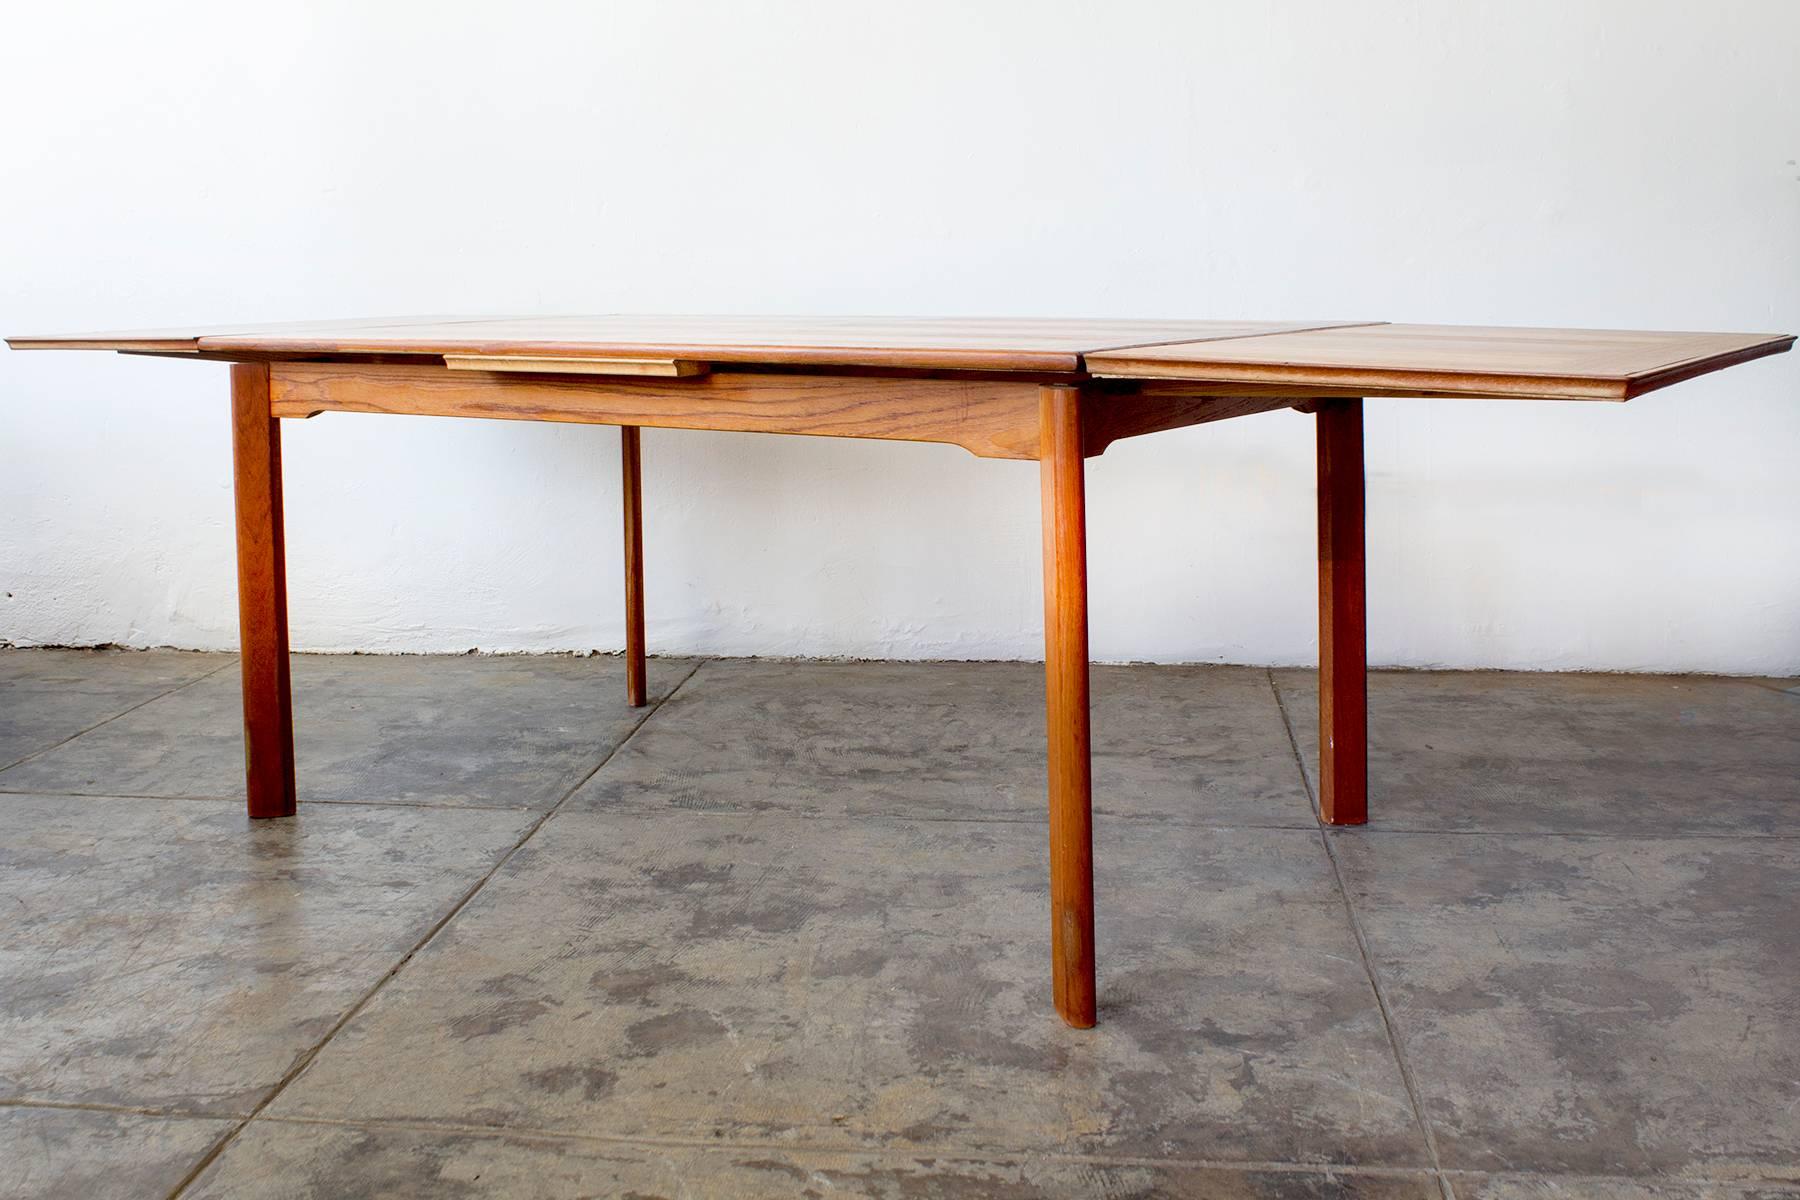 Beautiful Danish modern teak dining table with expanding leaves and statement angled legs. Stamped "Denmark." Designer unknown; in the style of Arne Hovmand-Olsen or Johannes Andersen. 

Dimensions: 34.5" D x 54-74" W x